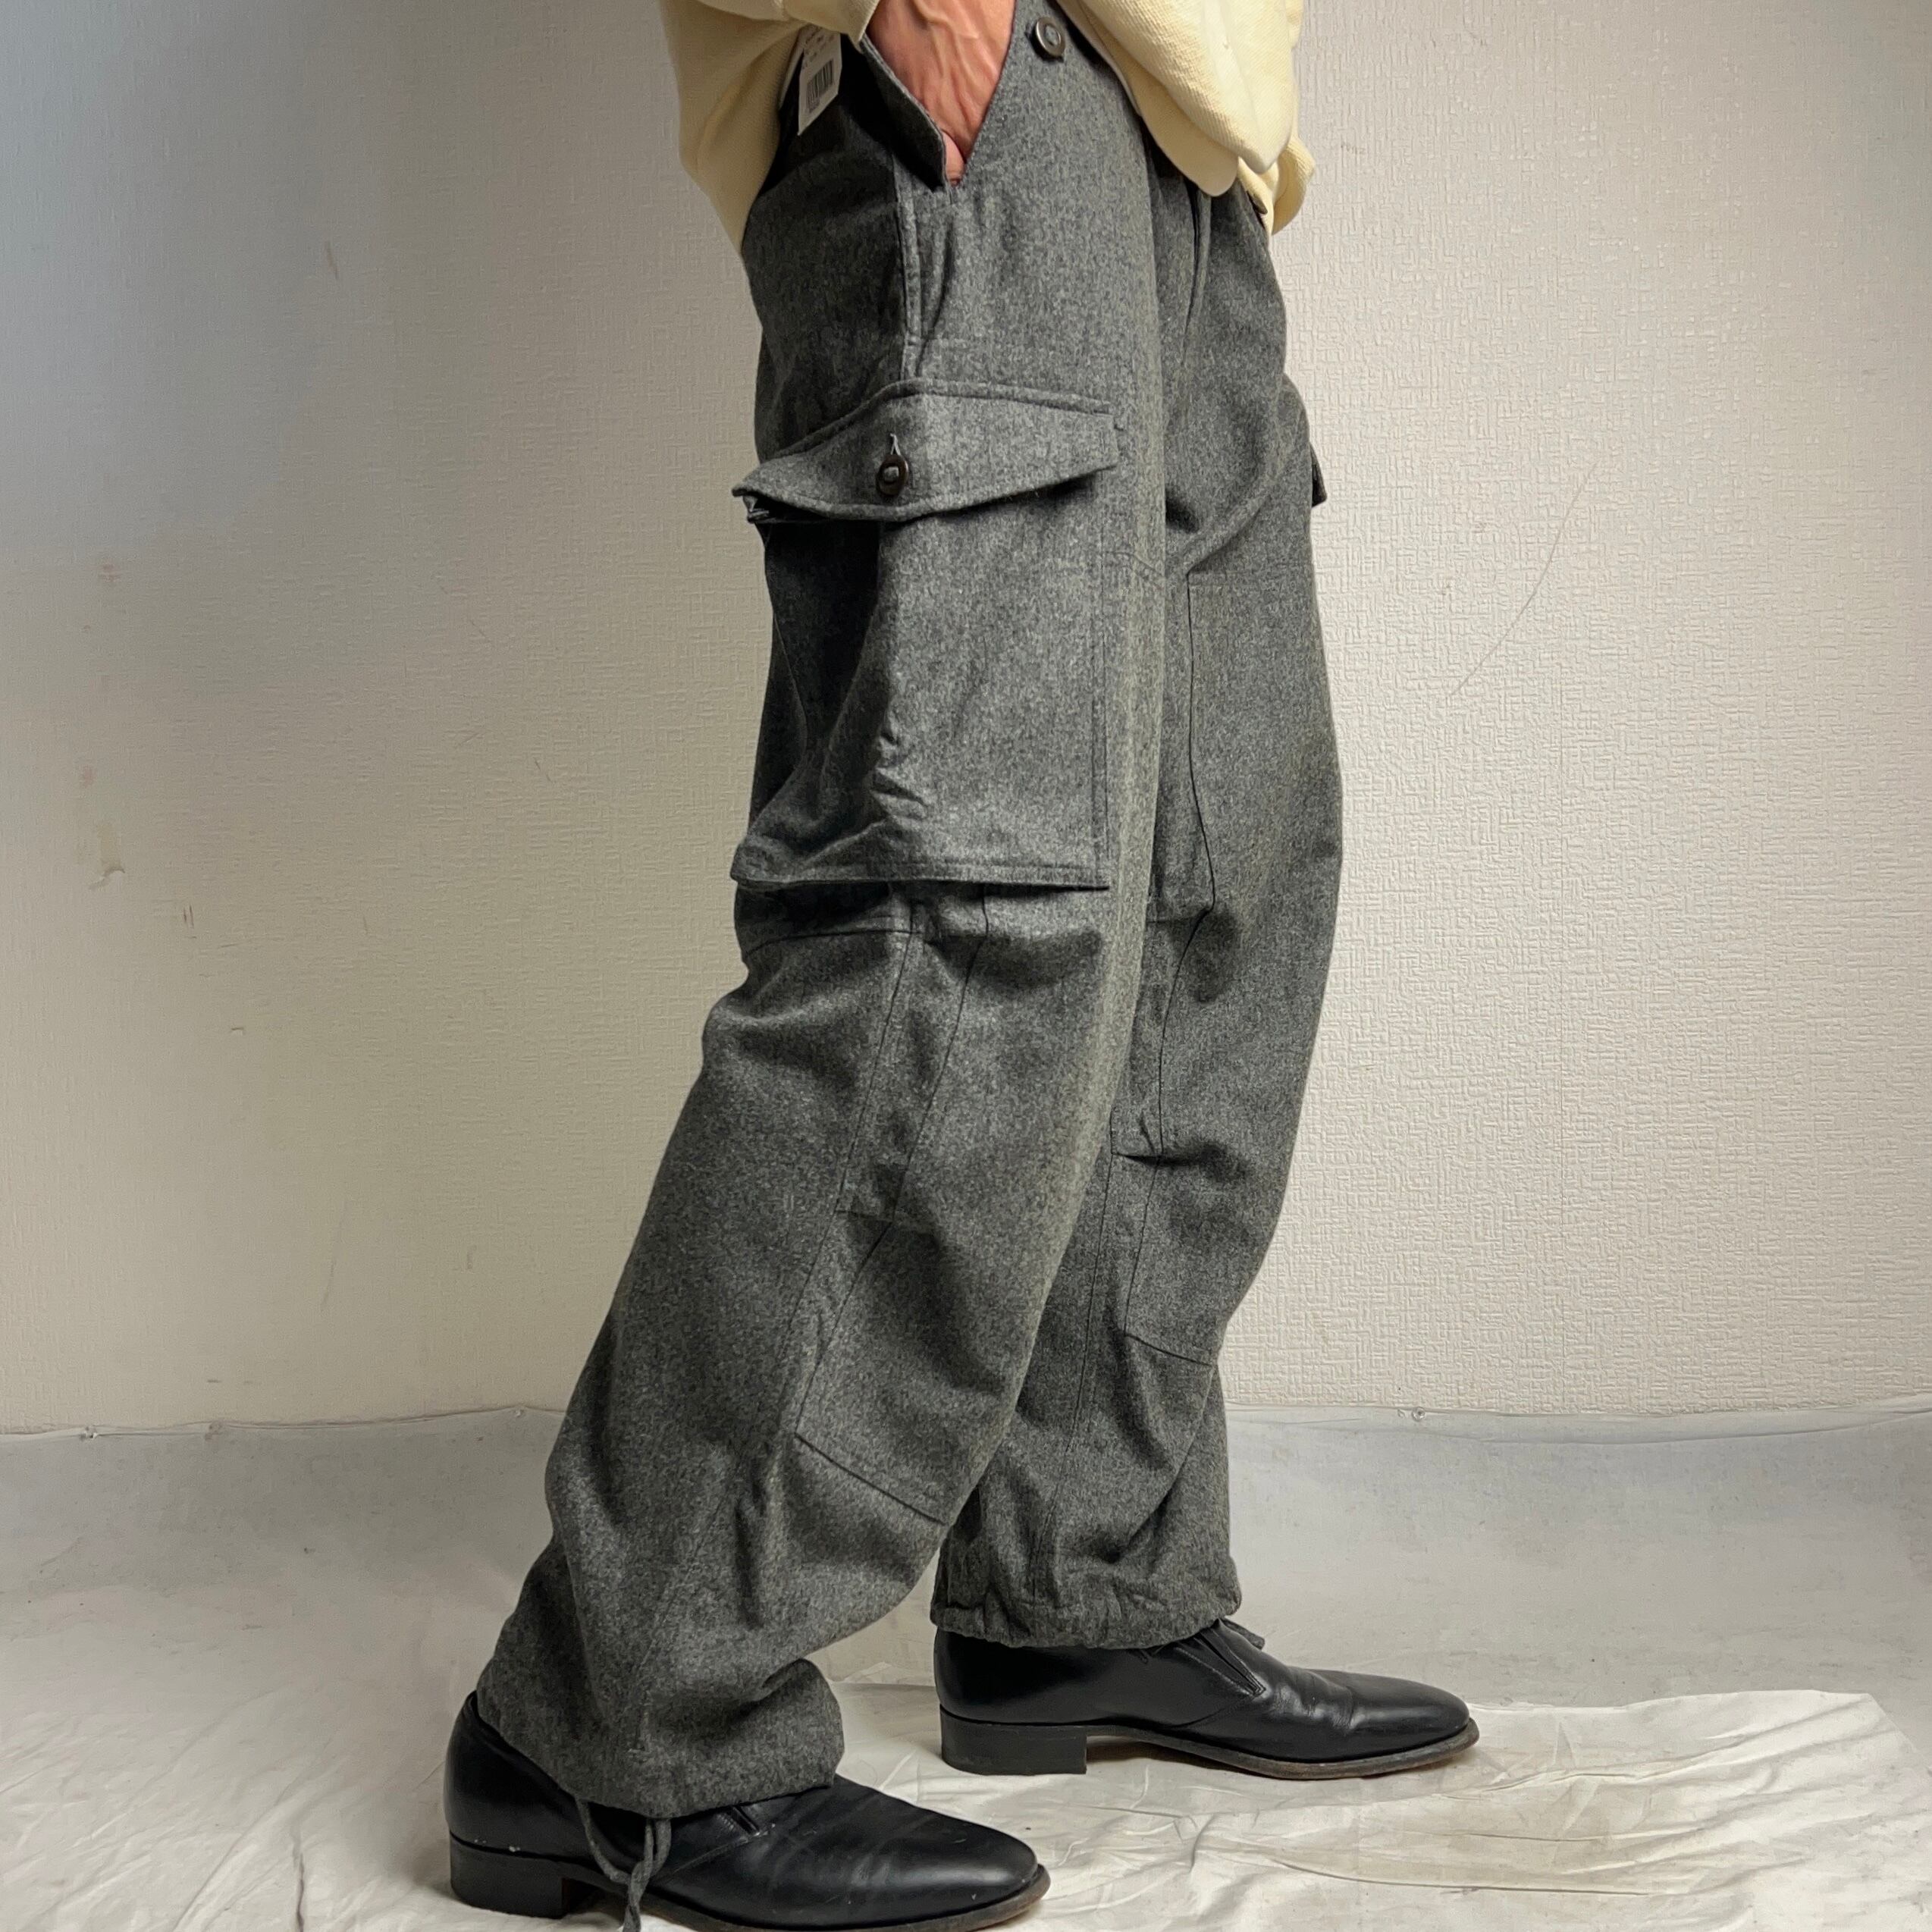 Polo by Ralph Lauren Wool×Cashmere Cargo Pants ITALY製 35/30 ポロ